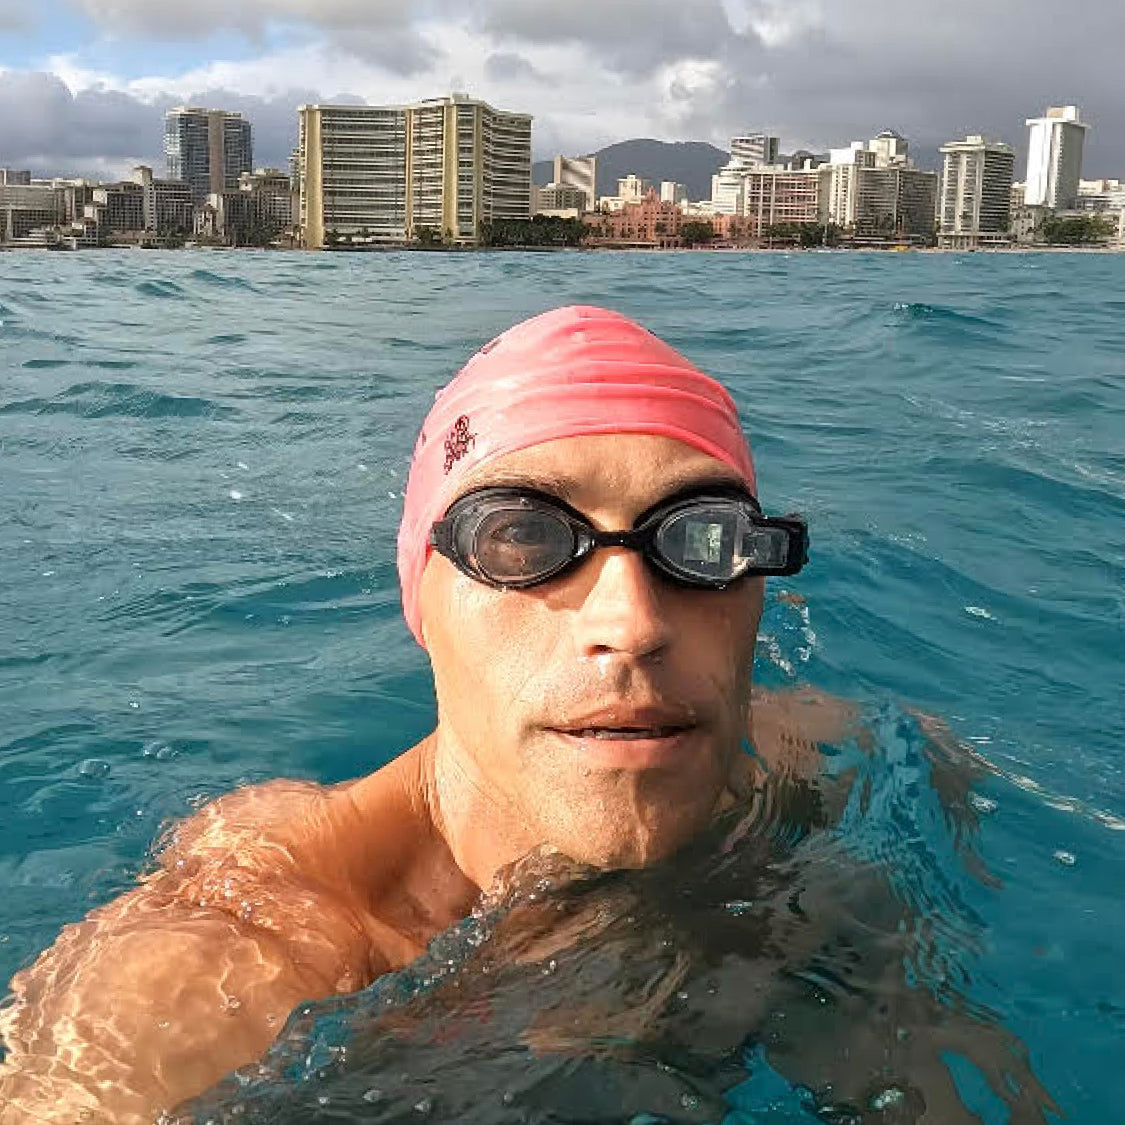 Finding Swimming as an Adult - 10 Questions with Jon Storm